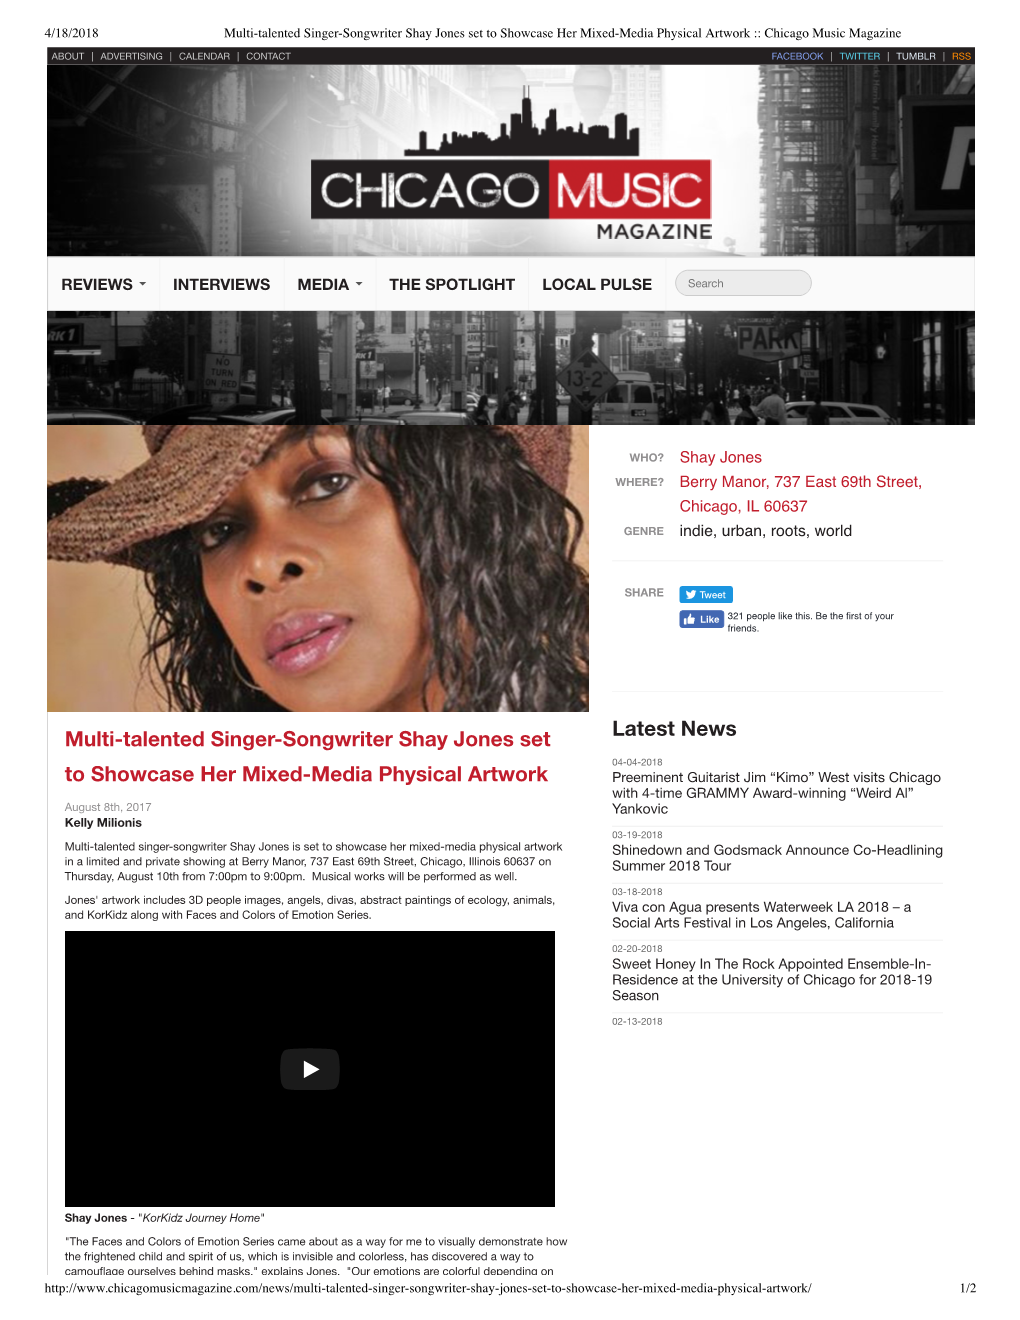 Shay Featured in Chicago Music Magazine